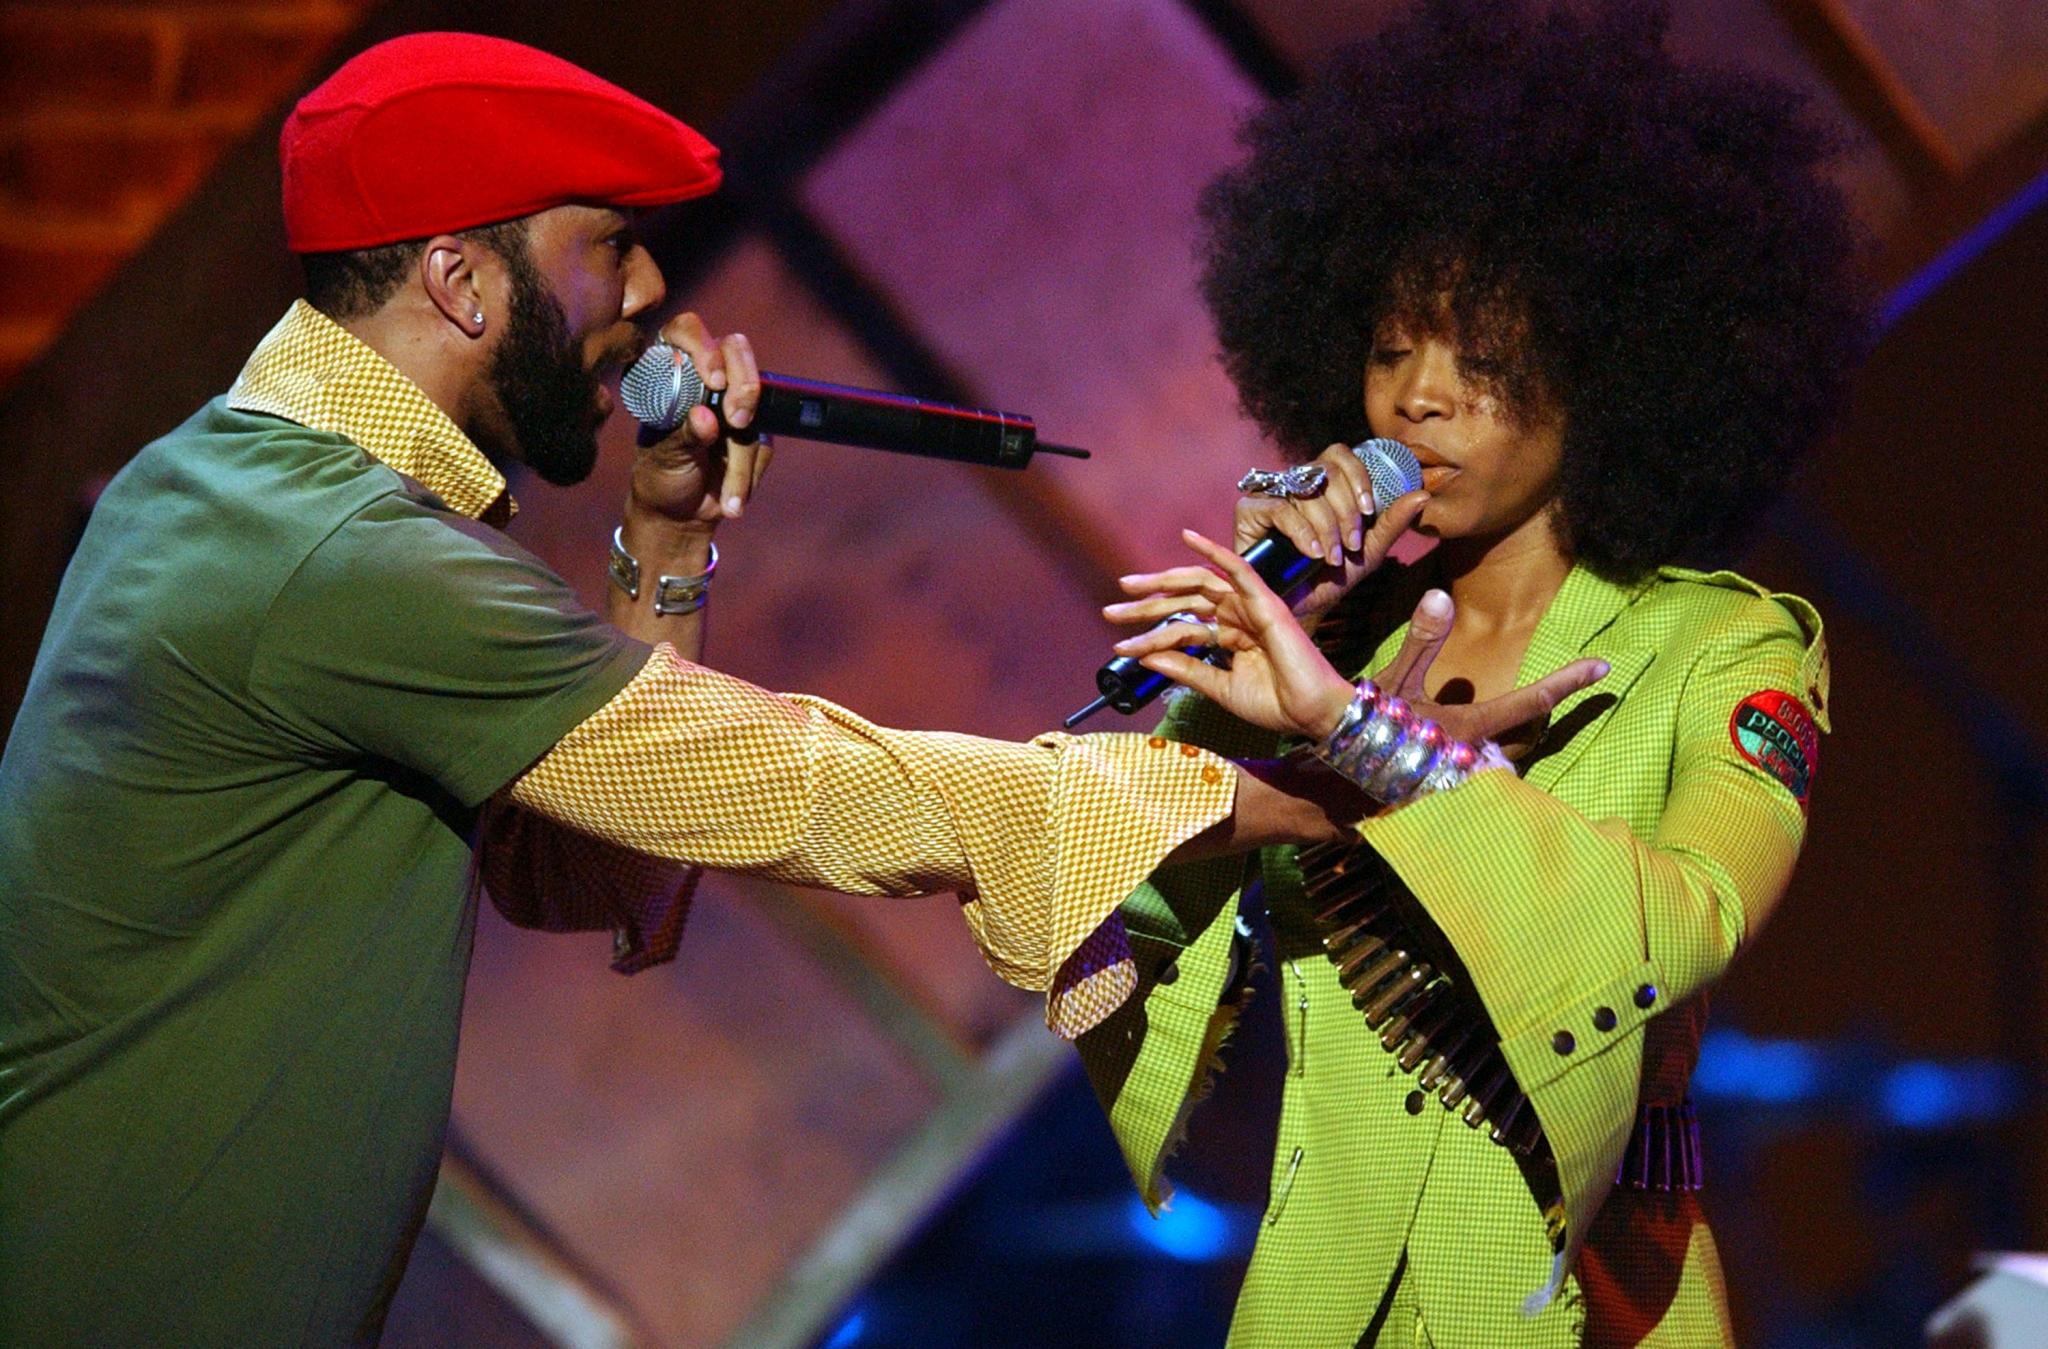 #ThrowbackThursday: Relive Erykah Badu & Common's 'Love of My Life'
